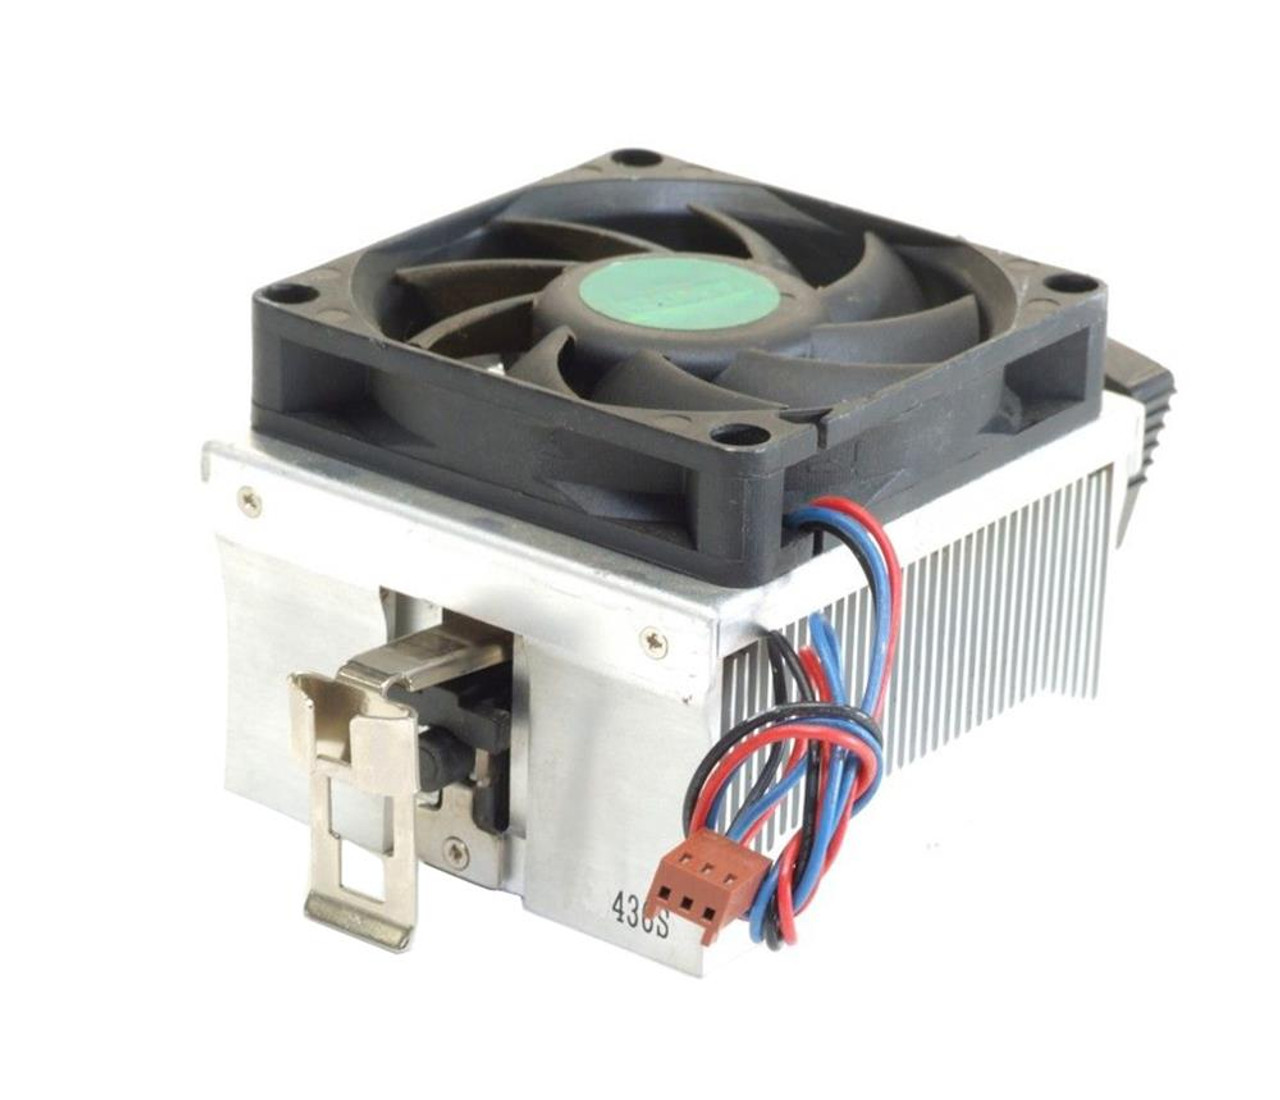 MF064-074 AMD CPU Cooler for AMD Opteron